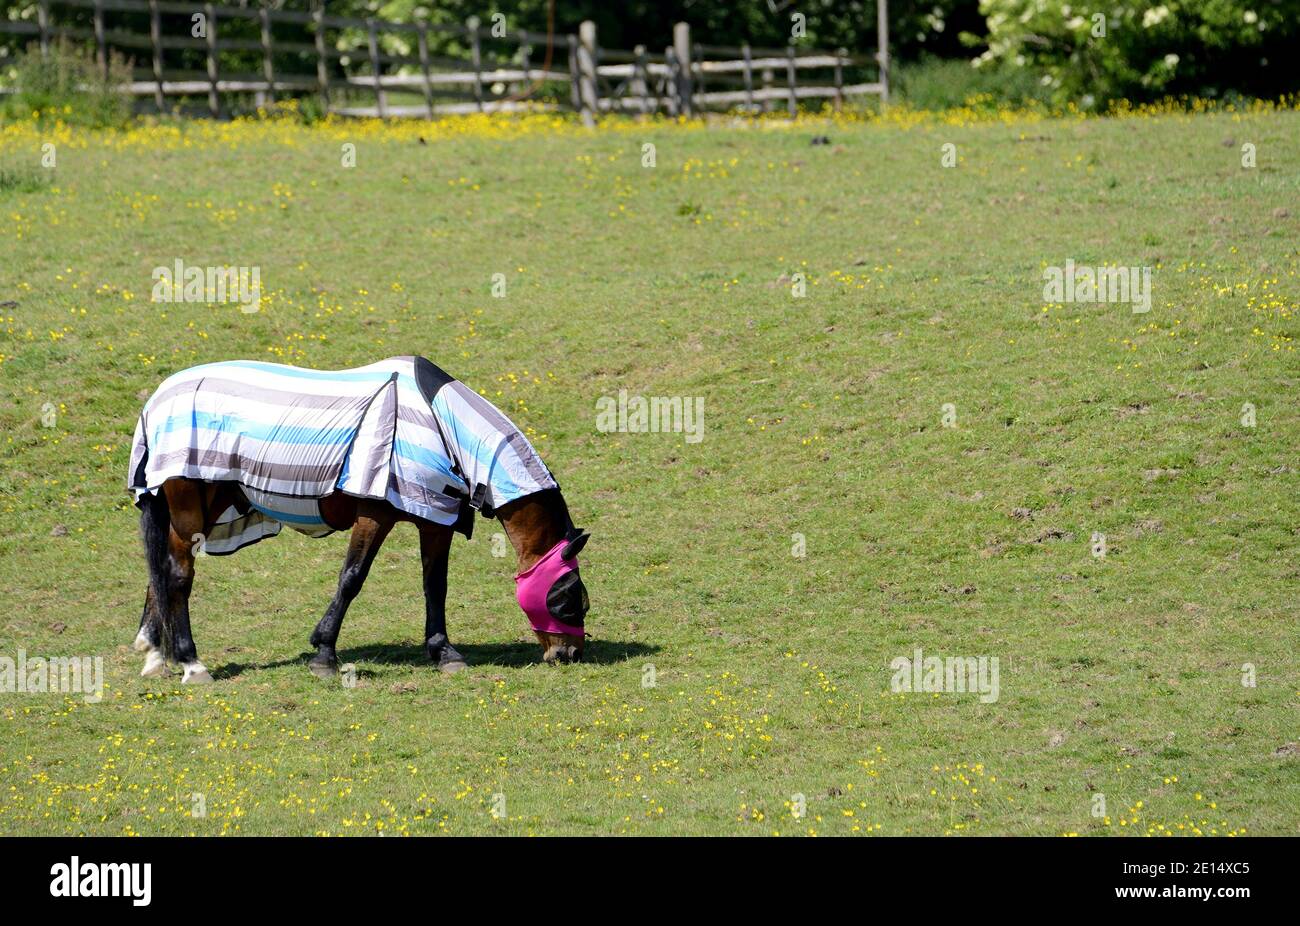 Horse wearing a blanket grazing in a field, Kent, England Stock Photo